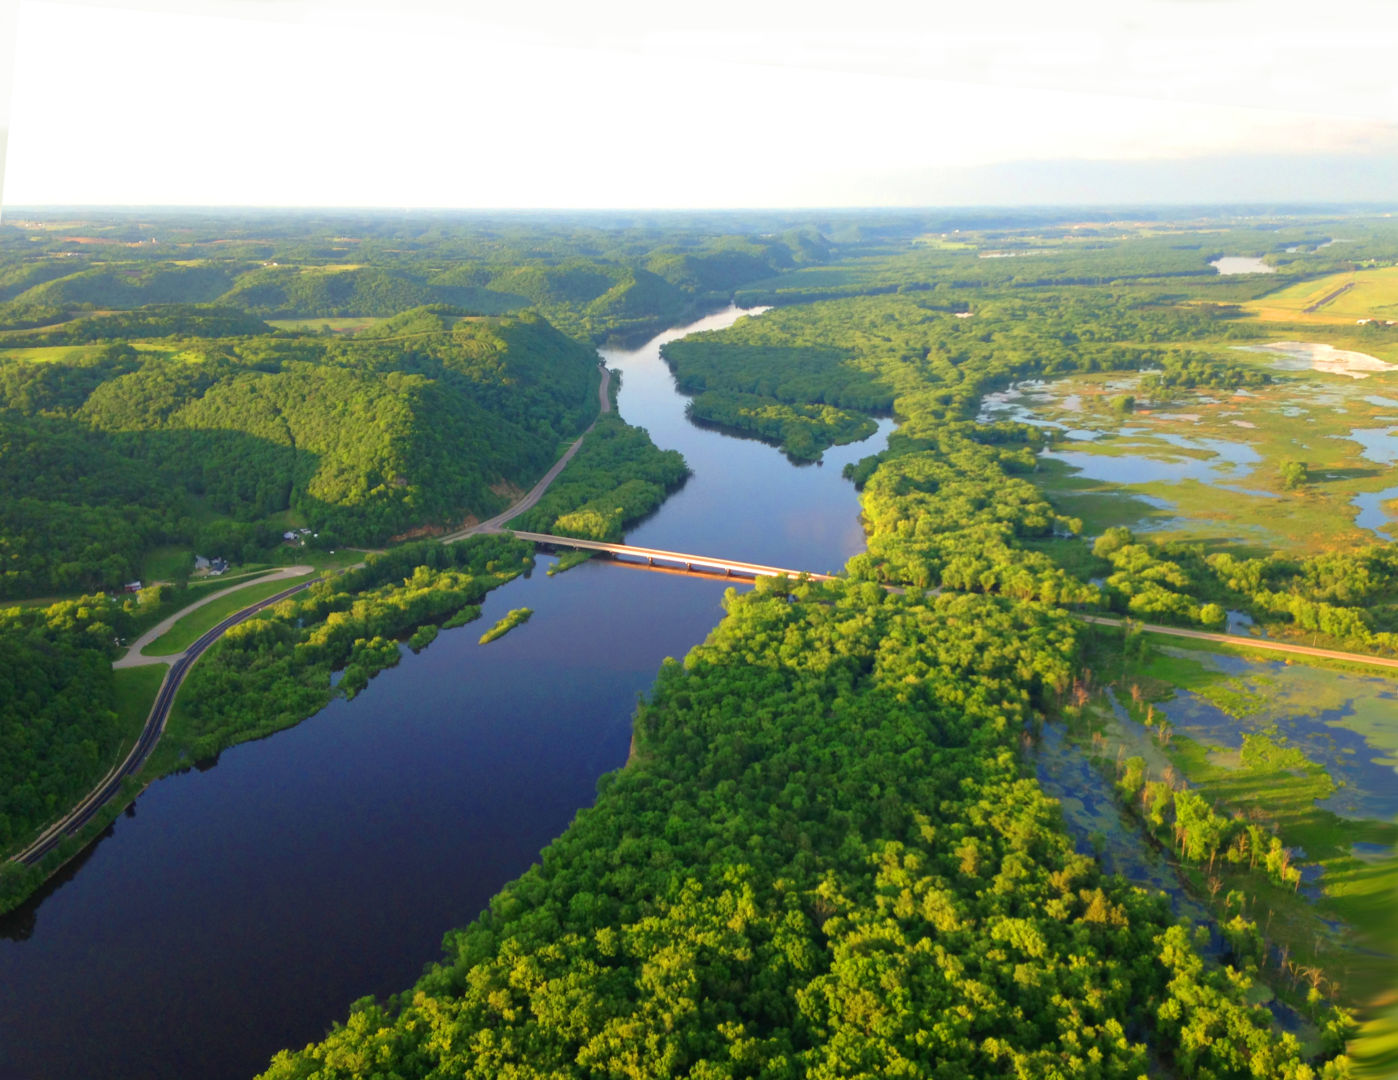 an aerial view of a large, free-flowing river with green floodplain forests along its banks and a bridge crossing in the middle.